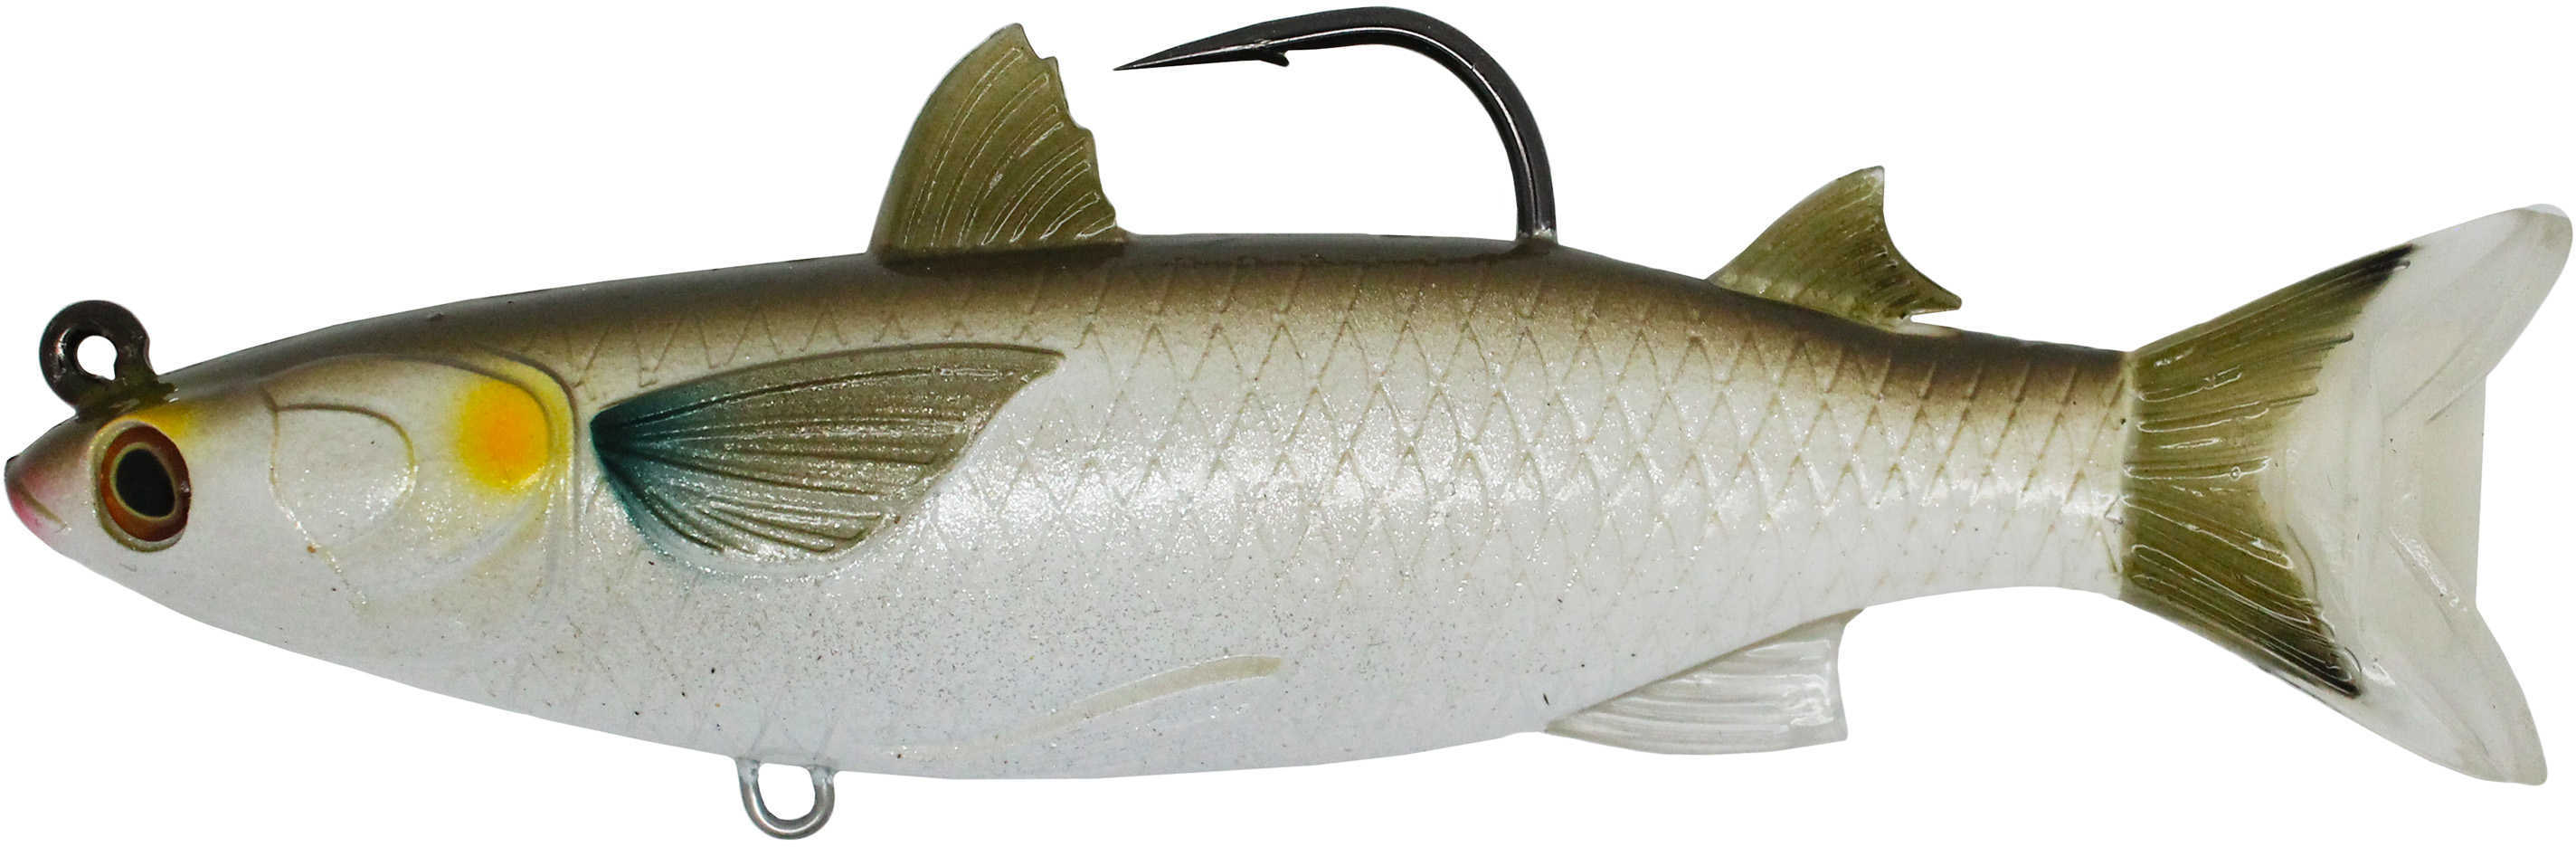 LIVETARGET Lures / Koppers Fishing and Tackle Corp Mullet Twitchbait Saltwater 5.5-Inches 9/0 Hook Medium/Slow Sinking Silver Md: